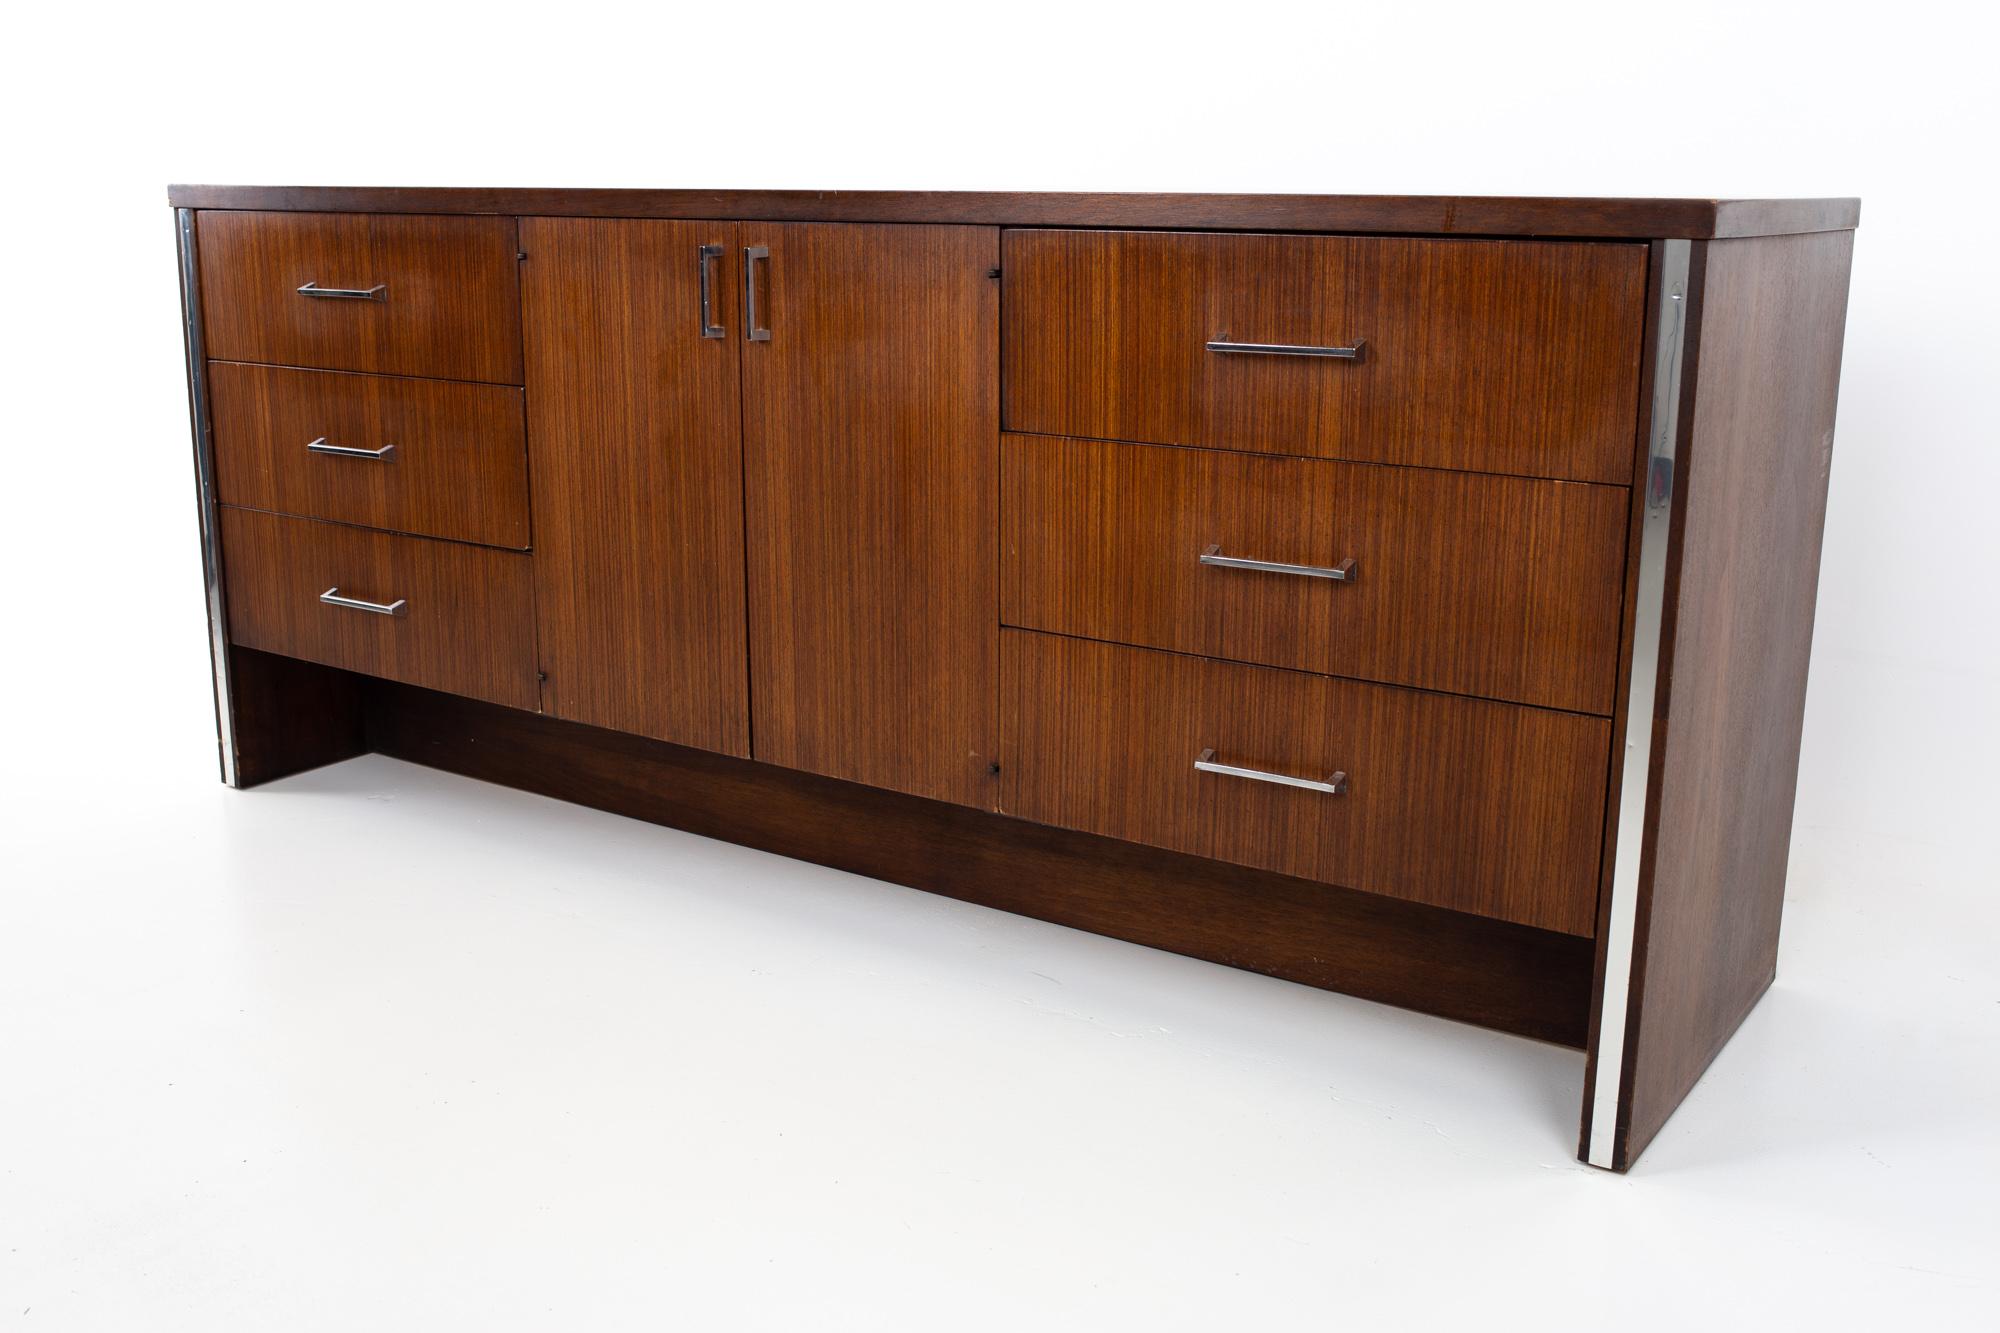 Broyhill premier mid century walnut and chrome 9 drawer lowboy dresser
Dresser measures: 71.75 wide x 19 deep x 30 inches high

All pieces of furniture can be had in what we call restored vintage condition. That means the piece is restored upon